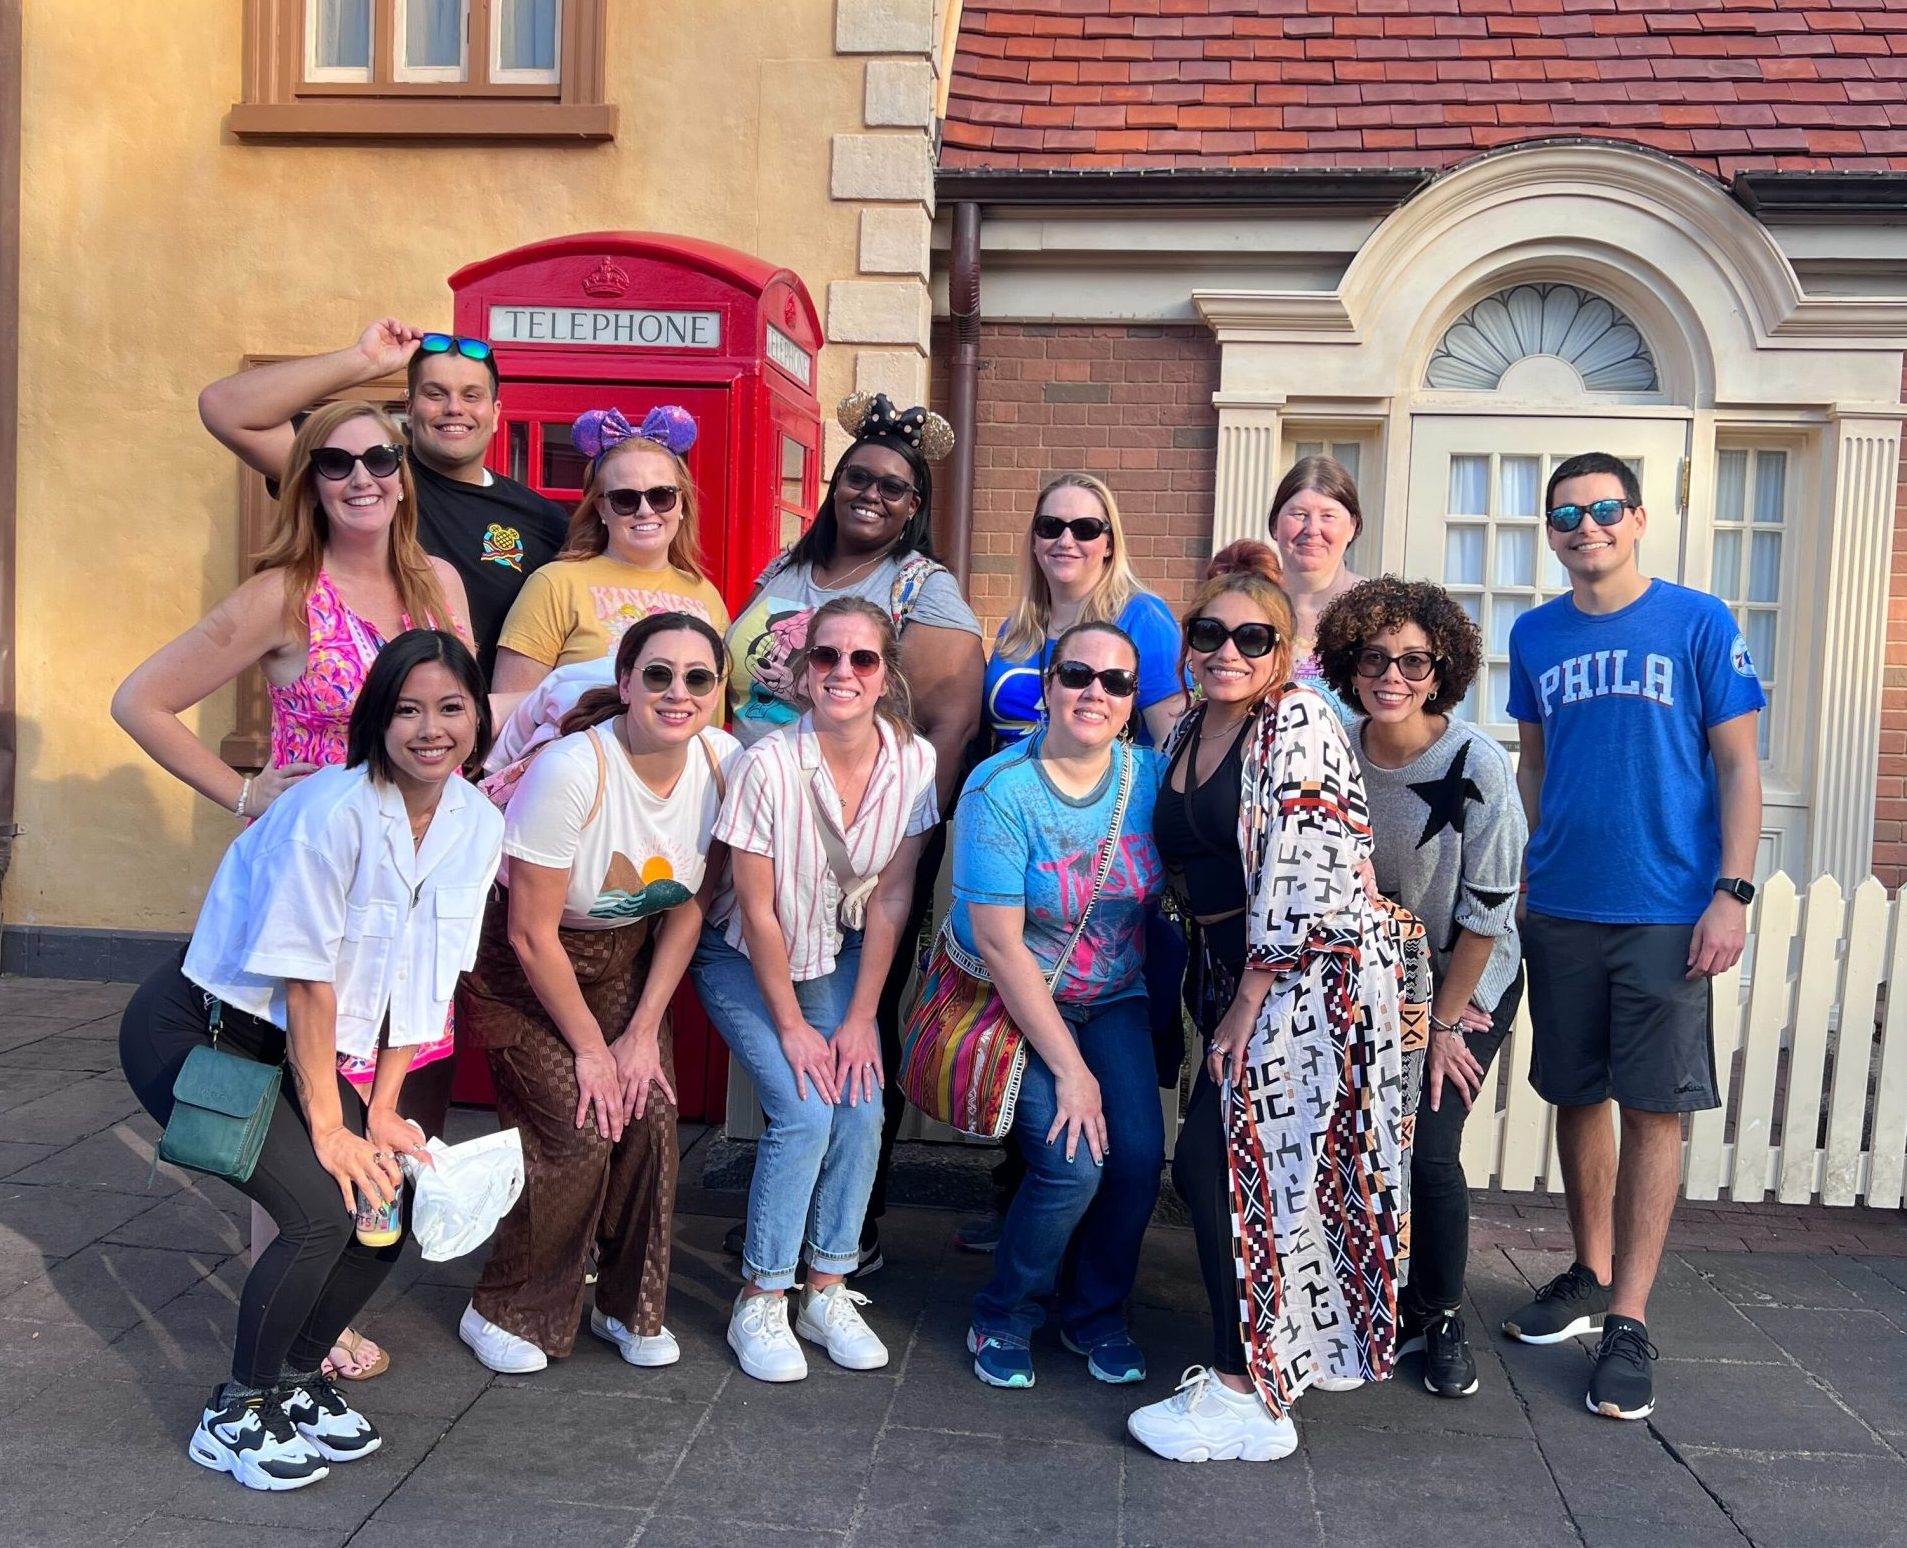 Disney DPEP Technology and Digital EMployee Michelle smiling with a group of her co-workers at a Disney Park